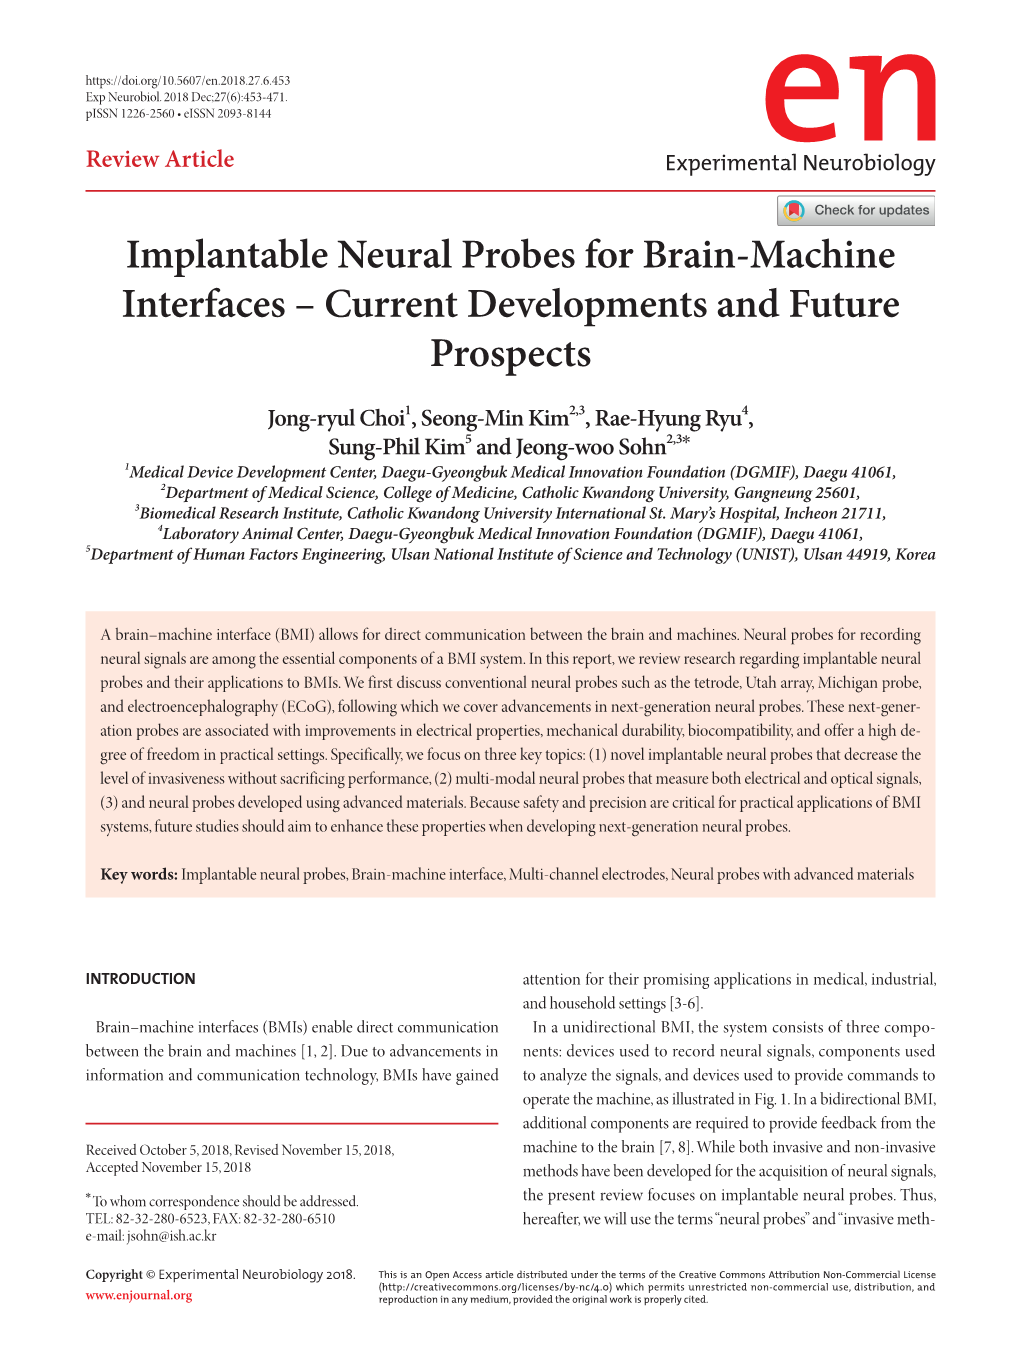 Implantable Neural Probes for Brain-Machine Interfaces – Current Developments and Future Prospects